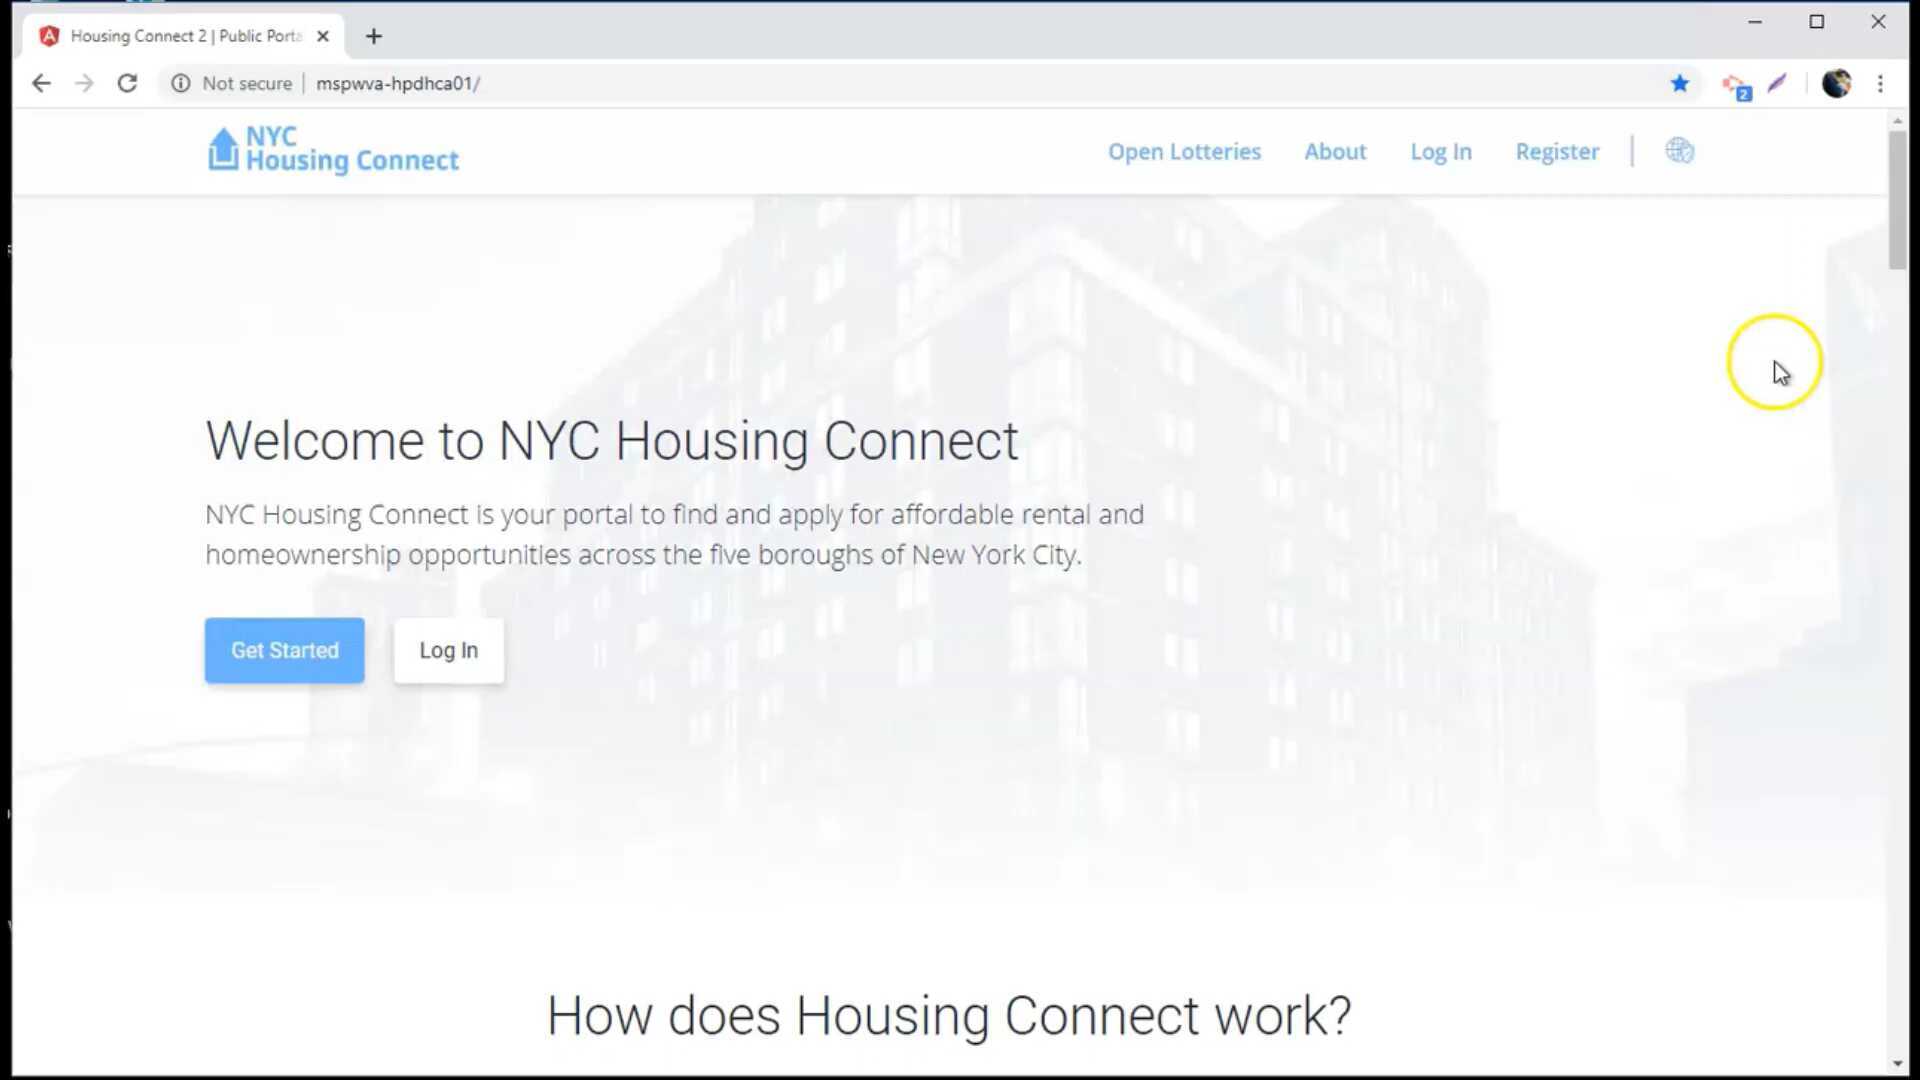 nyc housing connect affordable housing